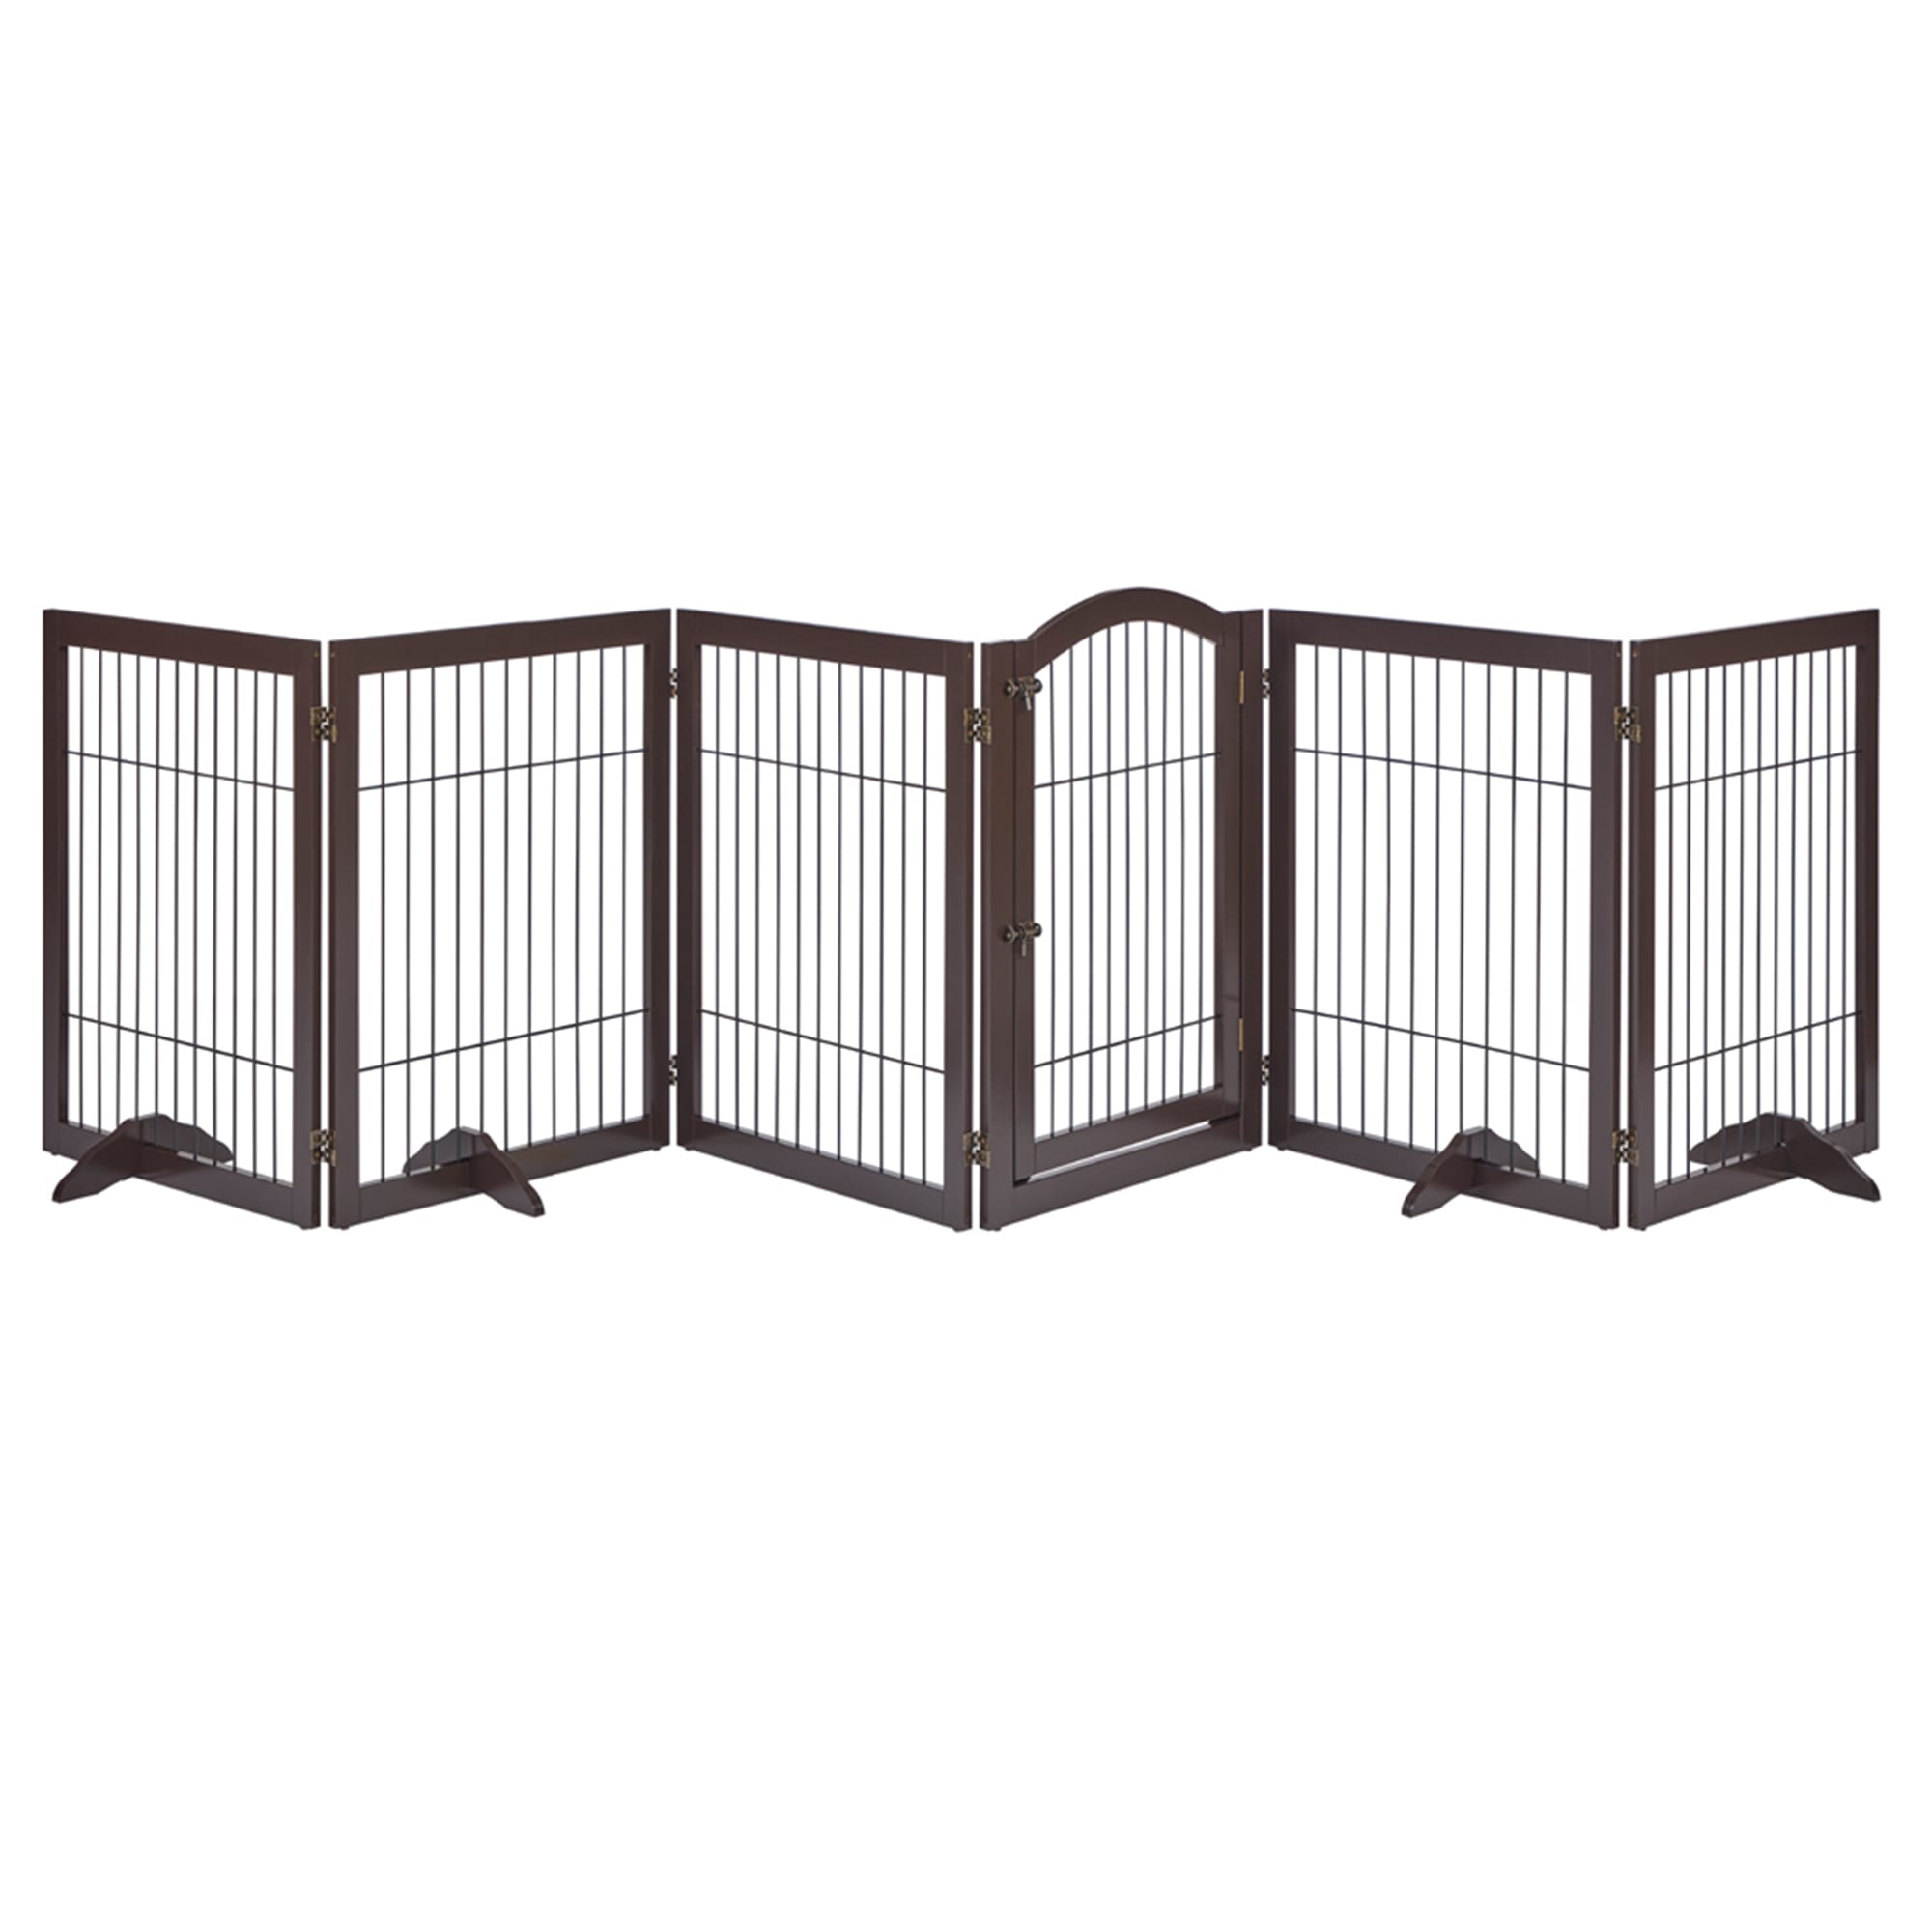 UniPaws 6 Panels Pet Espresso Gate with Wood Frame and Wire bars